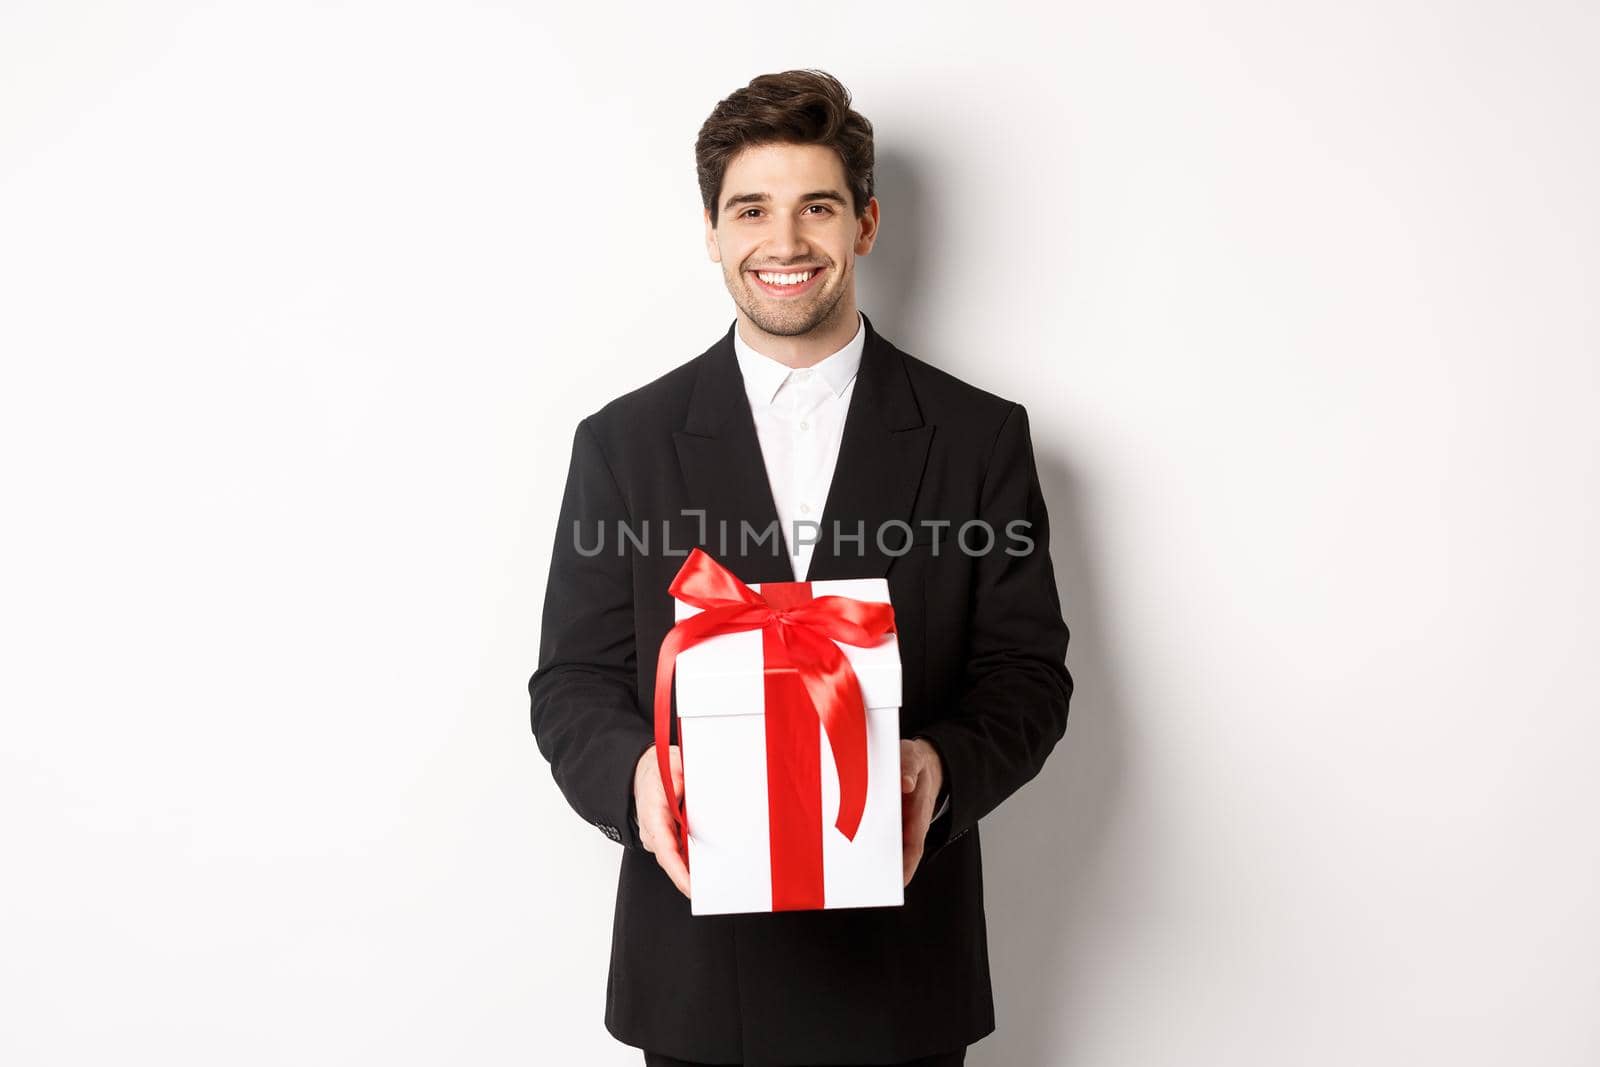 Concept of christmas holidays, celebration and lifestyle. Handsome man in black suit, have romantic present, holding gift in a box and smiling, standing against white background.